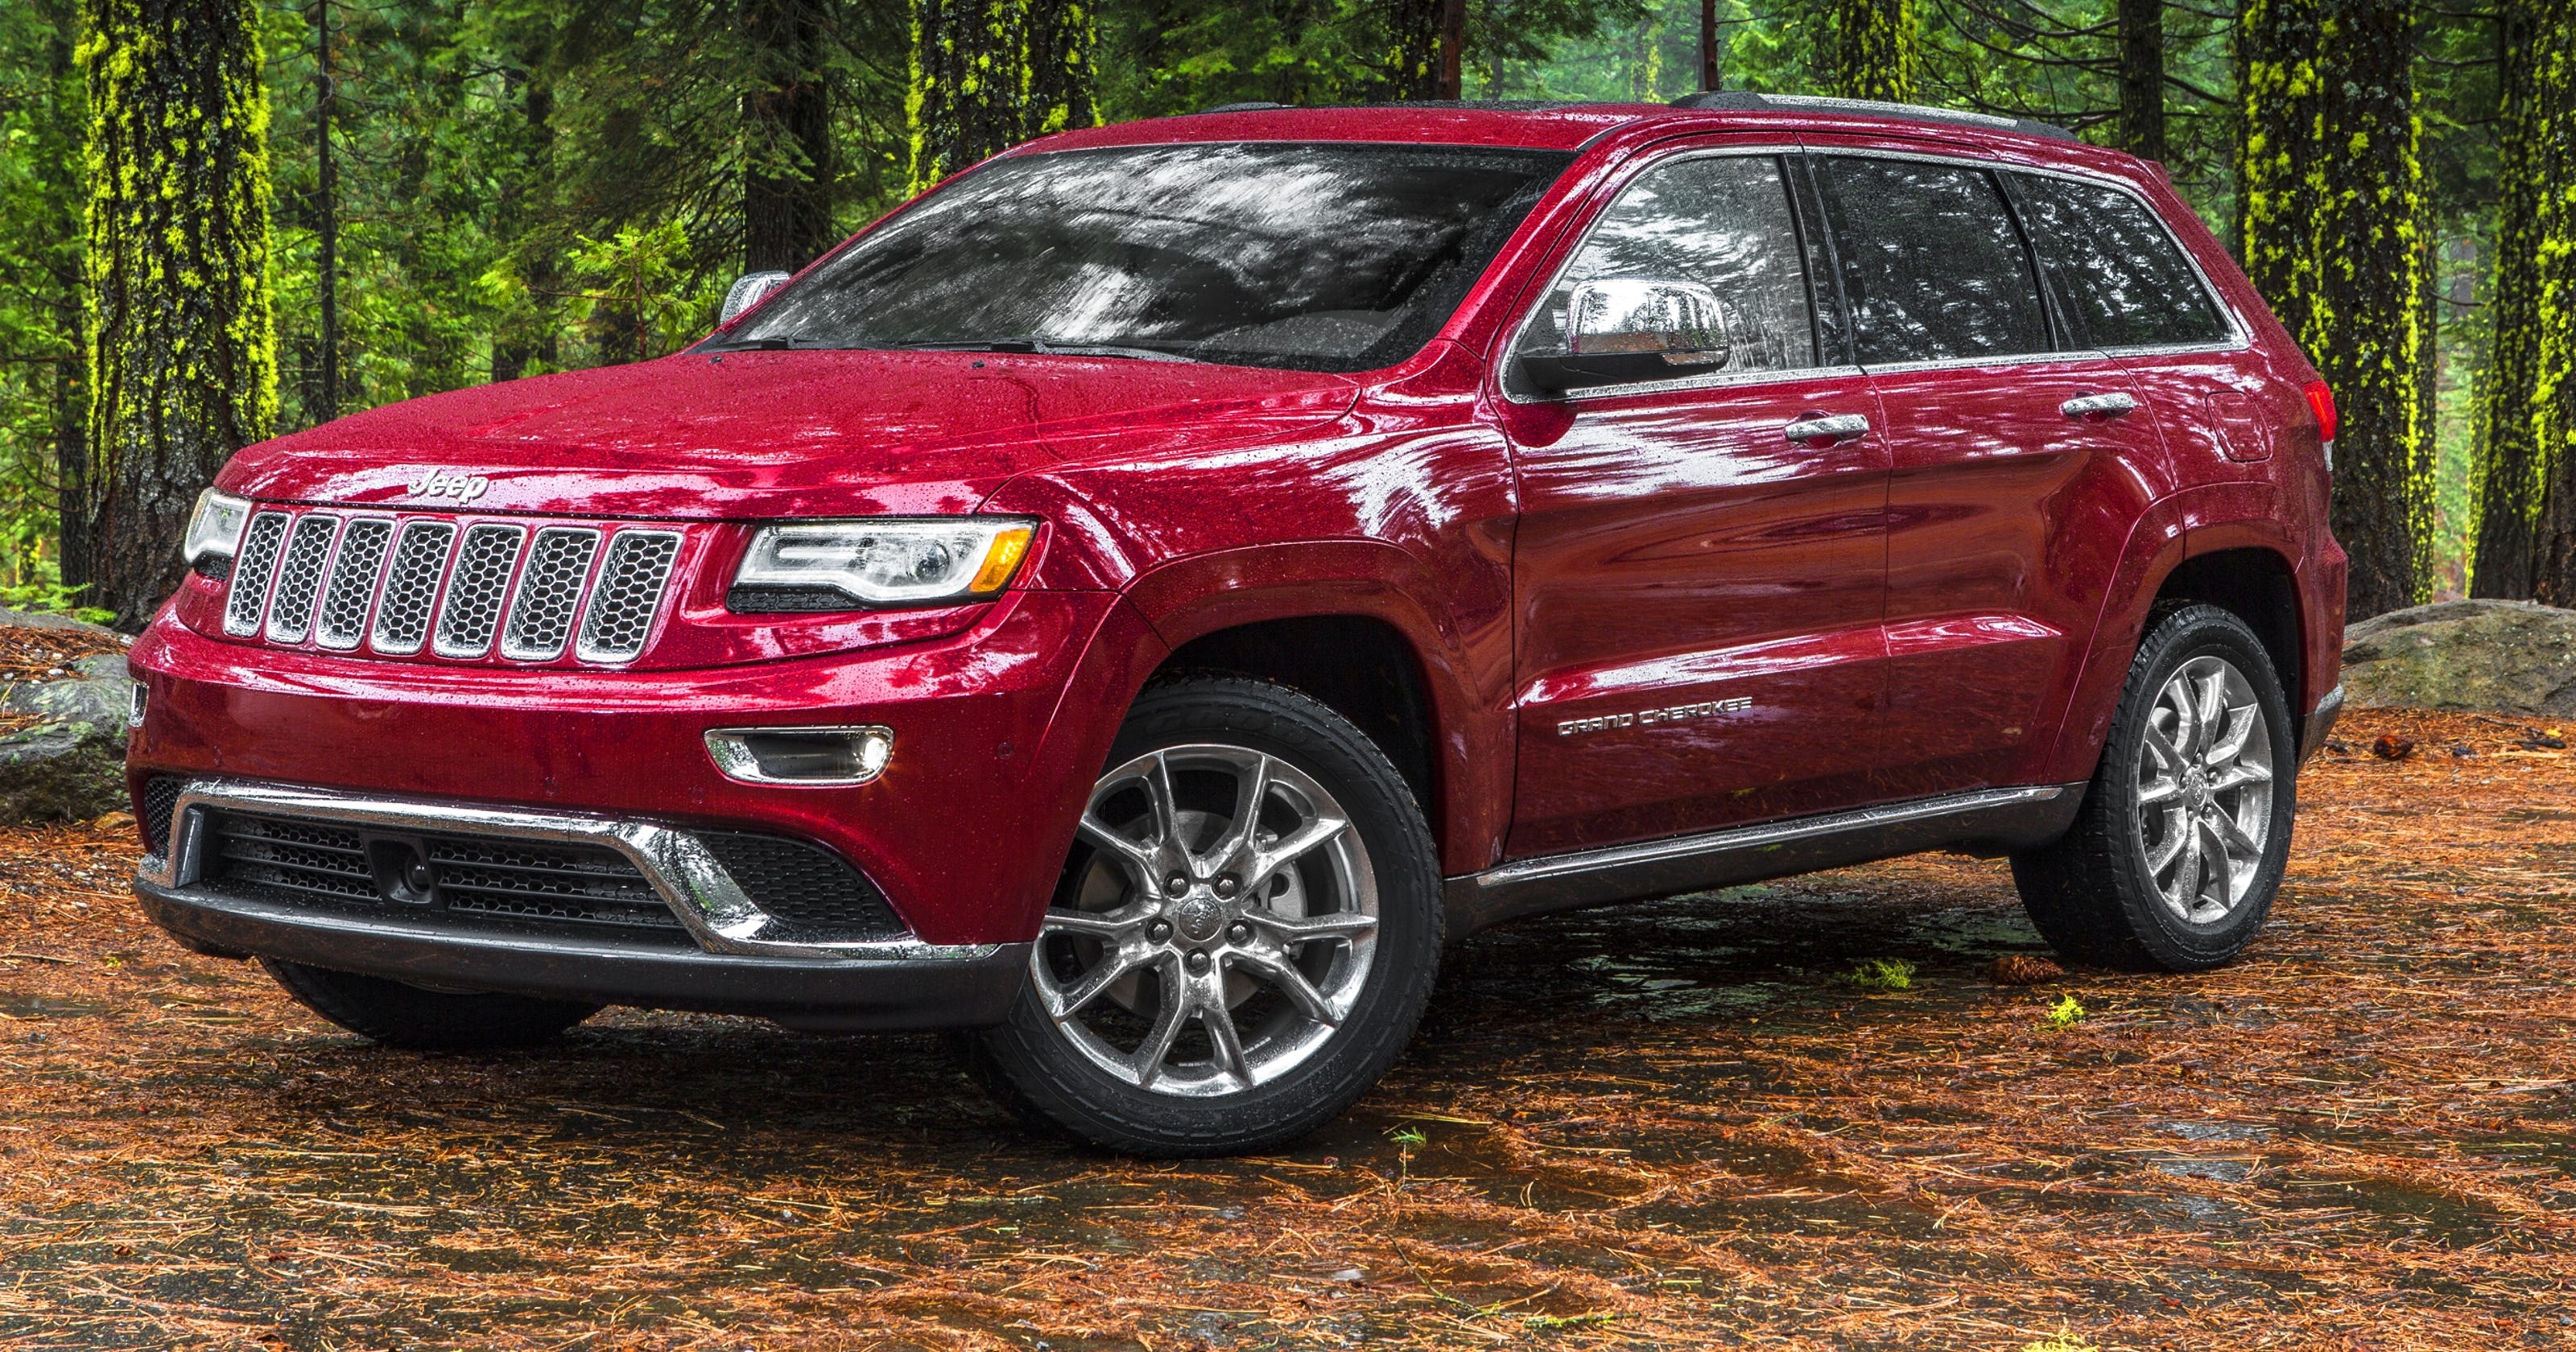 Jeep gives Grand Cherokee a redo, adds diesel option